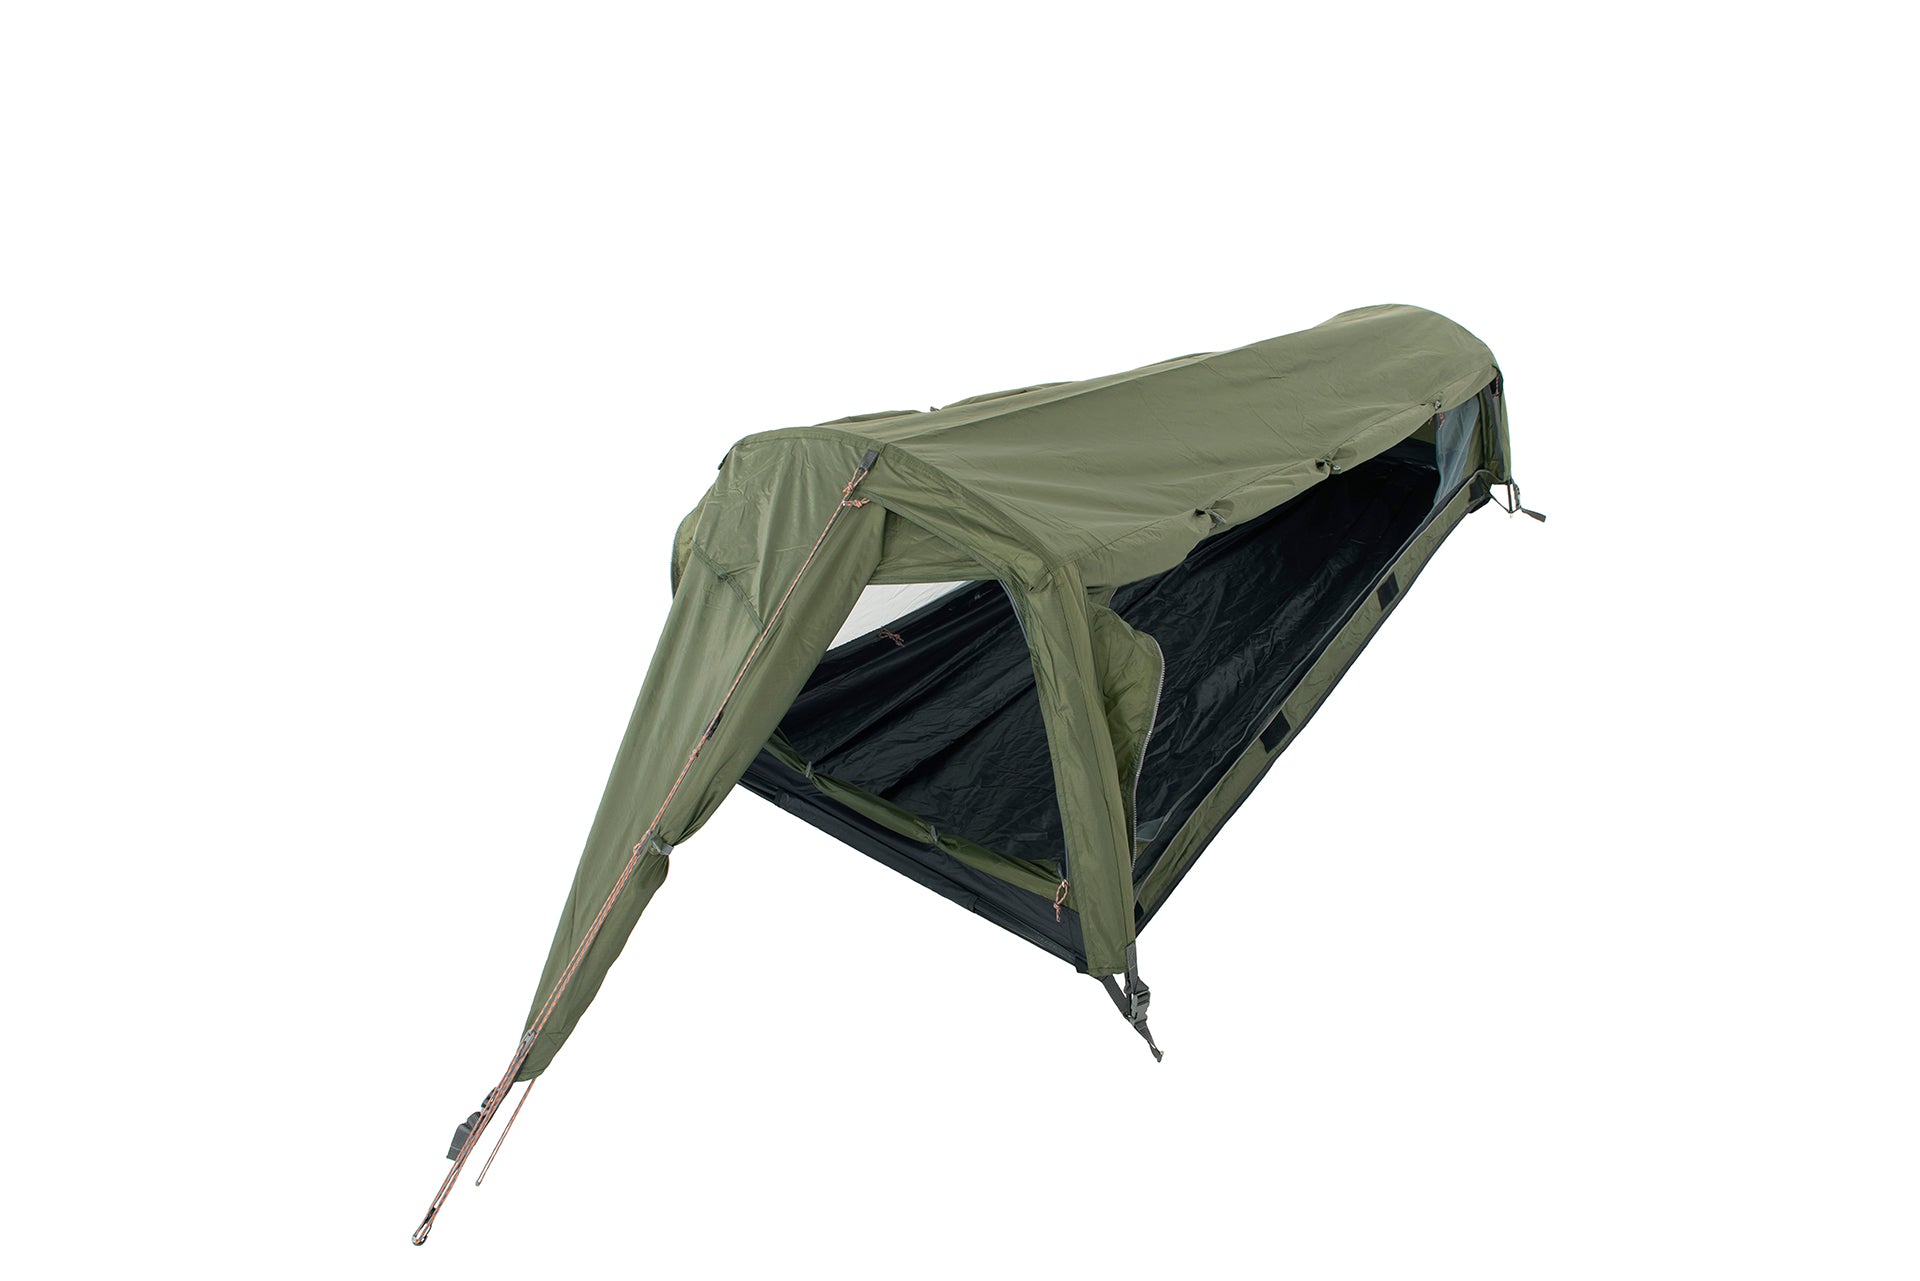 HYBRID | 1 PERSON BIVVY / HAMMOCK WATERPROOF TENT FOR VERSATILE OUTDOOR COMFORT - THE ULTIMATE CAMPING SOLUTION FOR BACKPACKING AND HIKING